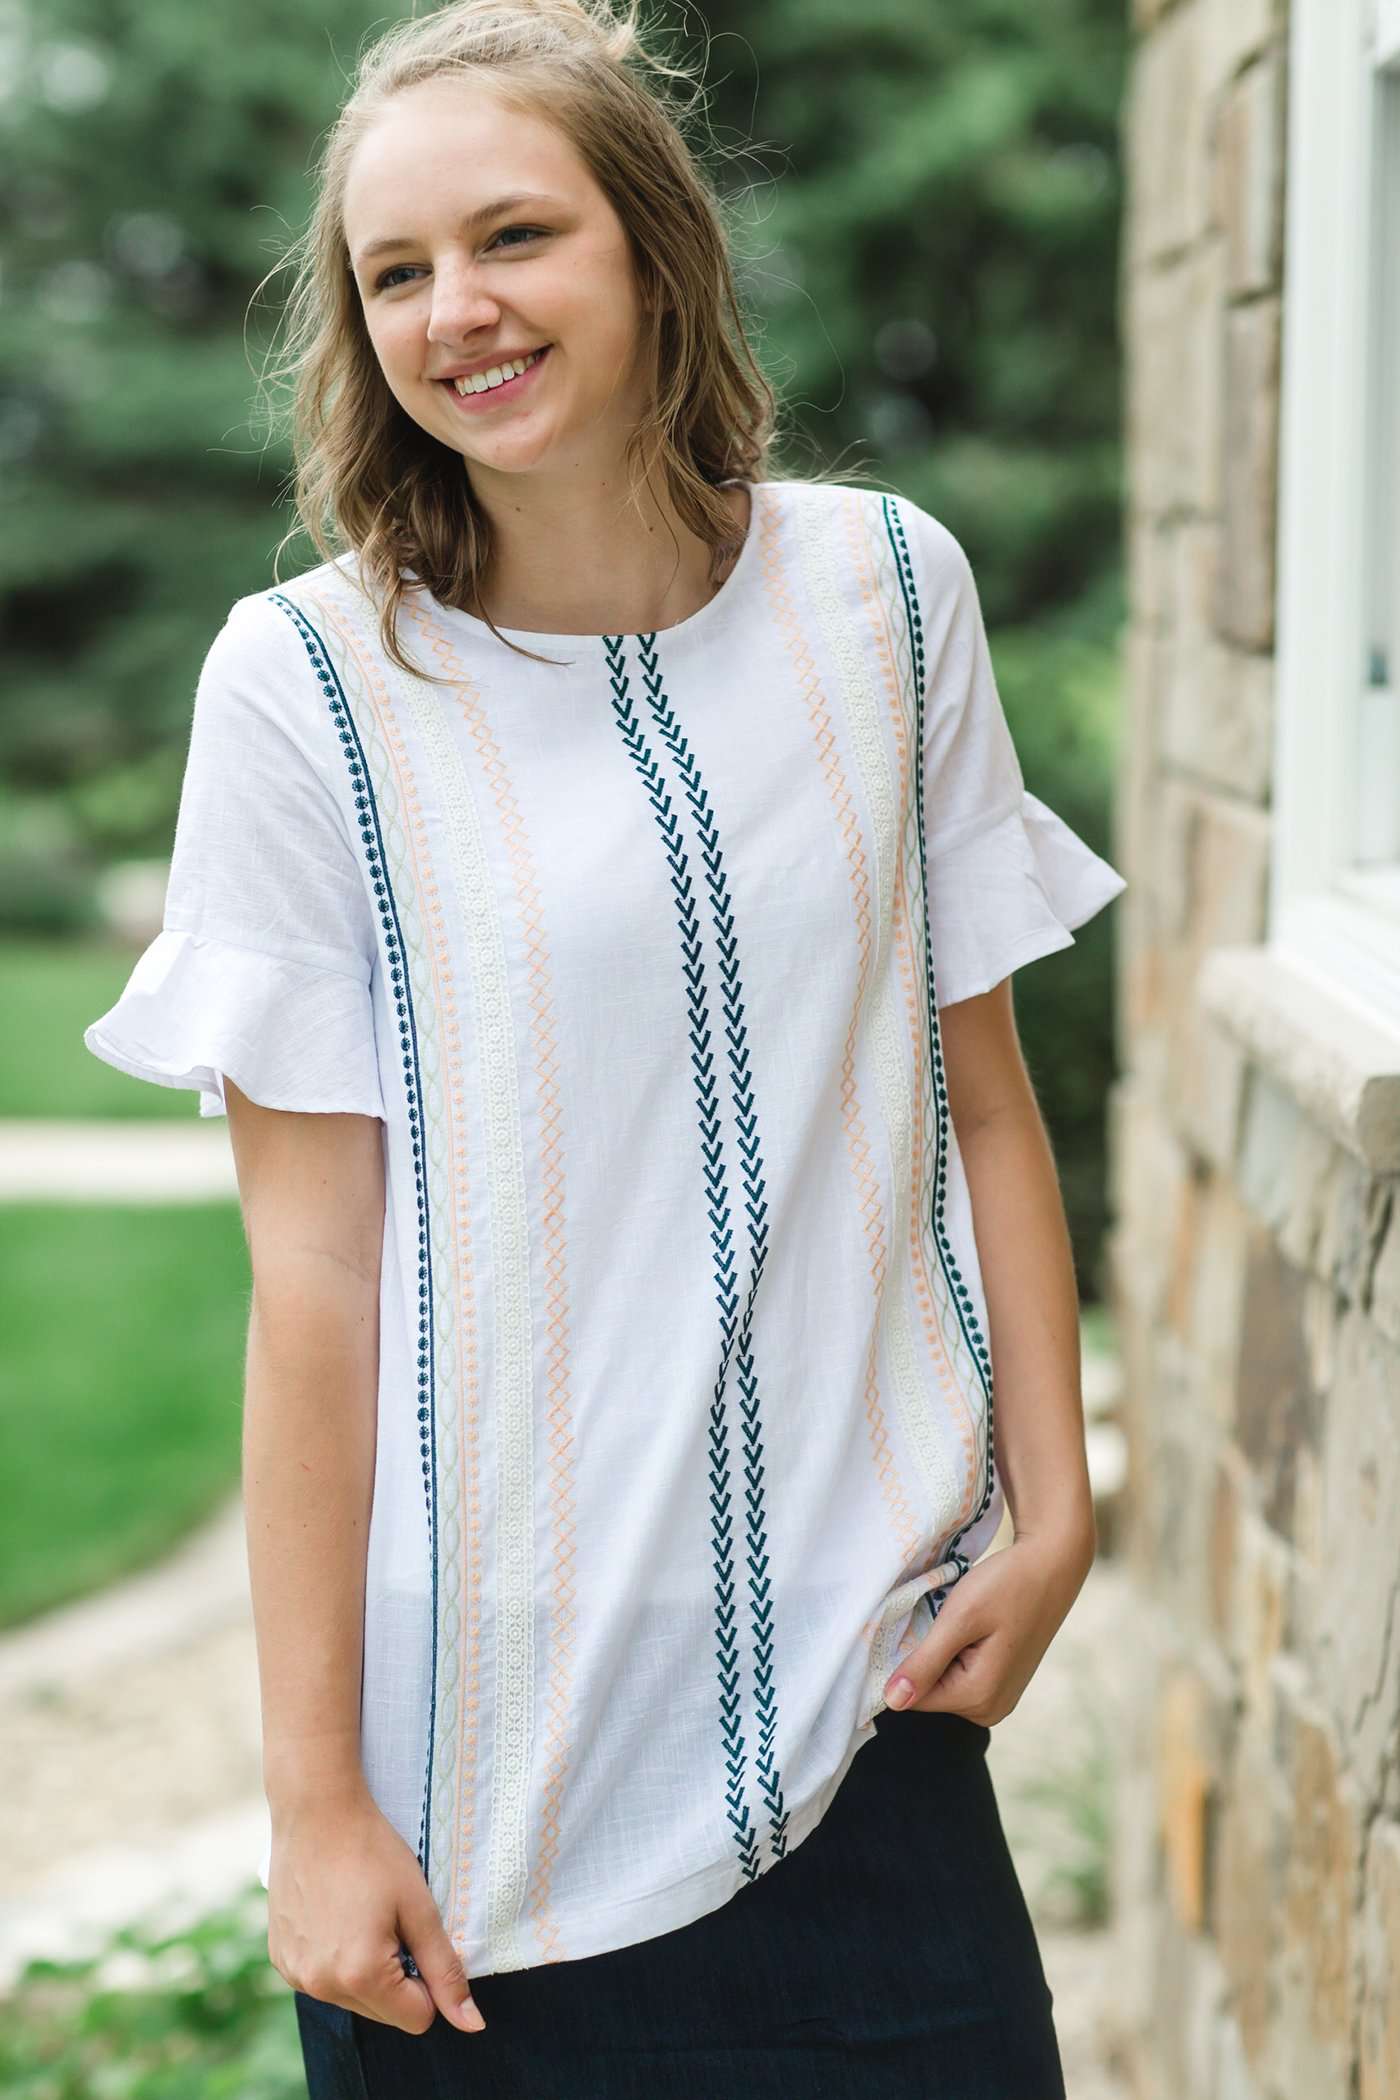 Modest white belle-sleeve top with Earthy colored embroidery down the front. 